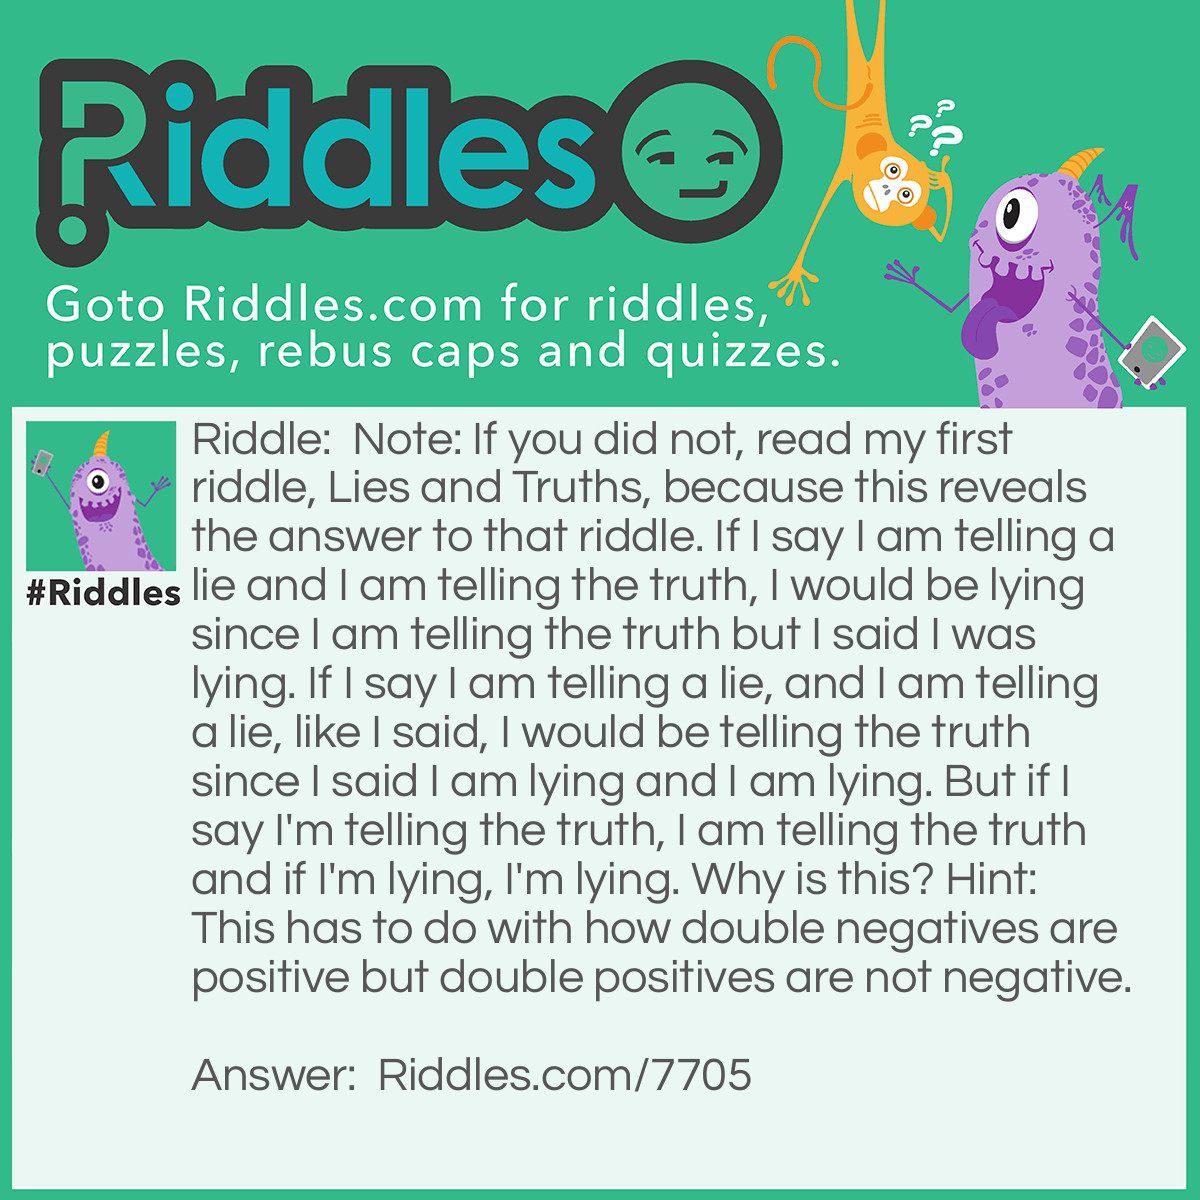 Riddle: Note: If you did not, read my first riddle, Lies and Truths, because this reveals the answer to that riddle. If I say I am telling a lie and I am telling the truth, I would be lying since I am telling the truth but I said I was lying. If I say I am telling a lie, and I am telling a lie, like I said, I would be telling the truth since I said I am lying and I am lying. But if I say I'm telling the truth, I am telling the truth and if I'm lying, I'm lying. Why is this? Hint: This has to do with how double negatives are positive but double positives are not negative. Answer: This is because if I say I am telling the truth and I am telling the truth, I would be telling the truth since saying I am telling the truth and actually telling the truth is tellling the truth. Ready for more? If I say I am telling the truth and I am actually lying, I would be lying since I am telling you I'm telling the truth but I'm not telling the truth. Double negatives: If you say you aren't not something, you are something because if the fact that you are not something is false, then you are something. But if you say you are are something, you wouldn't be not something since the fact that you are something is true.